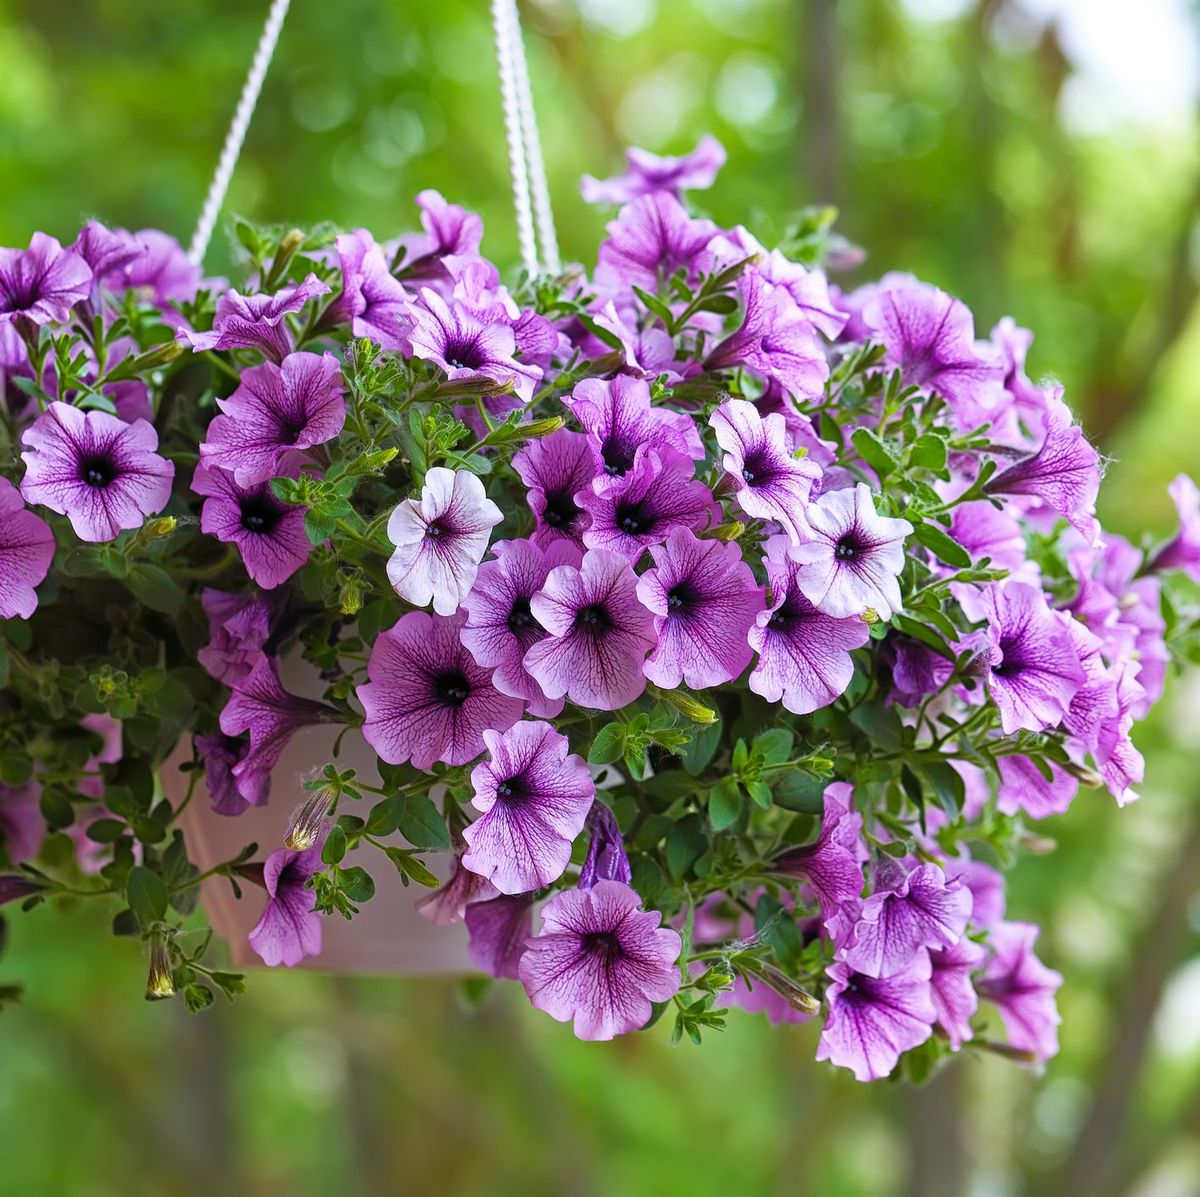 9 Tips For Growing Orchids in Hanging Baskets